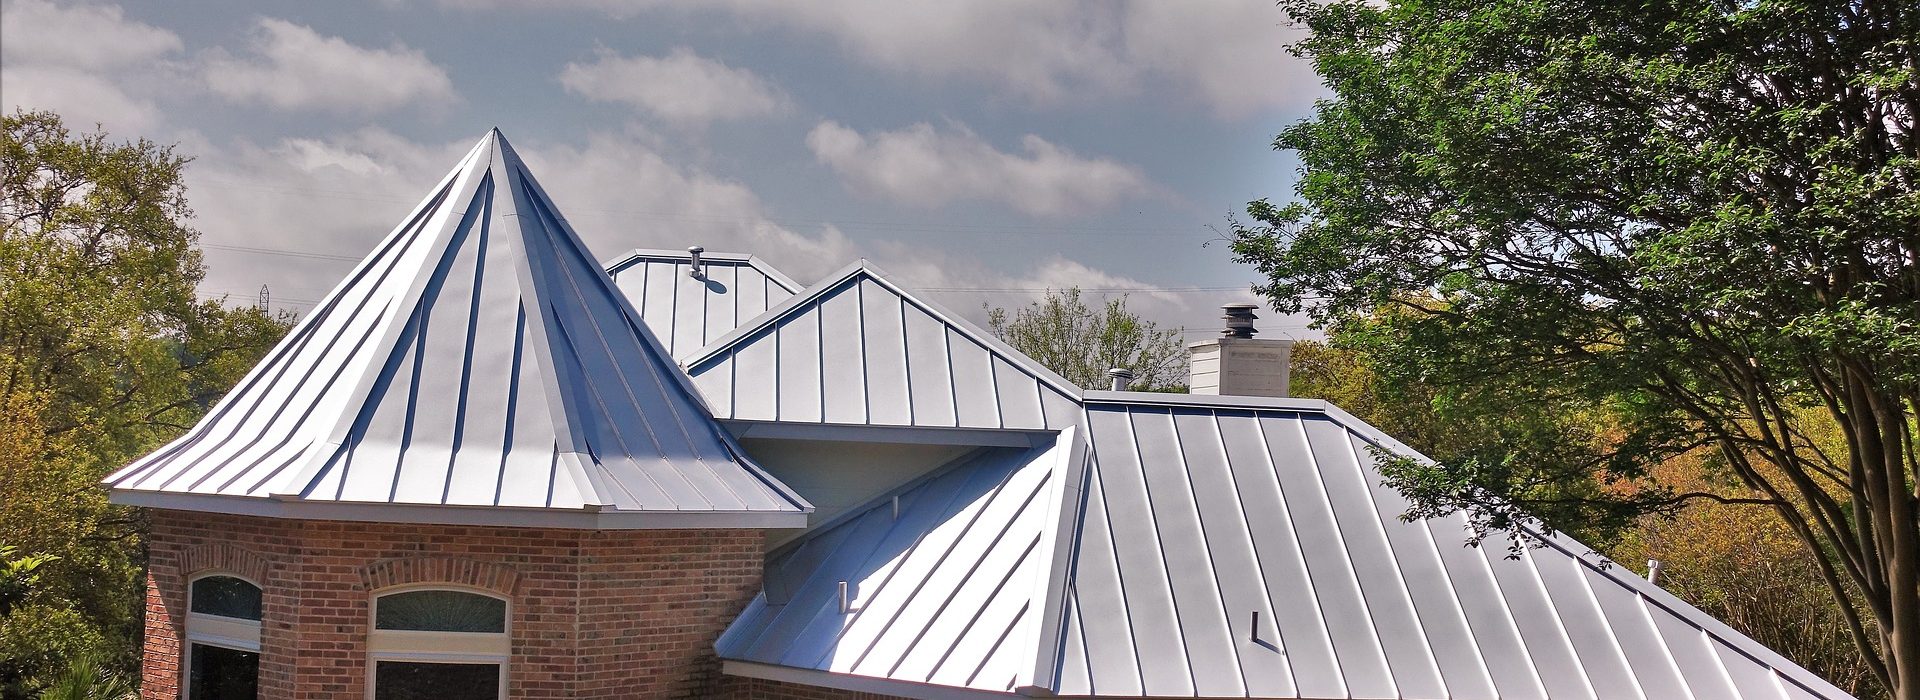 The Pros and Cons of Metal Roofing